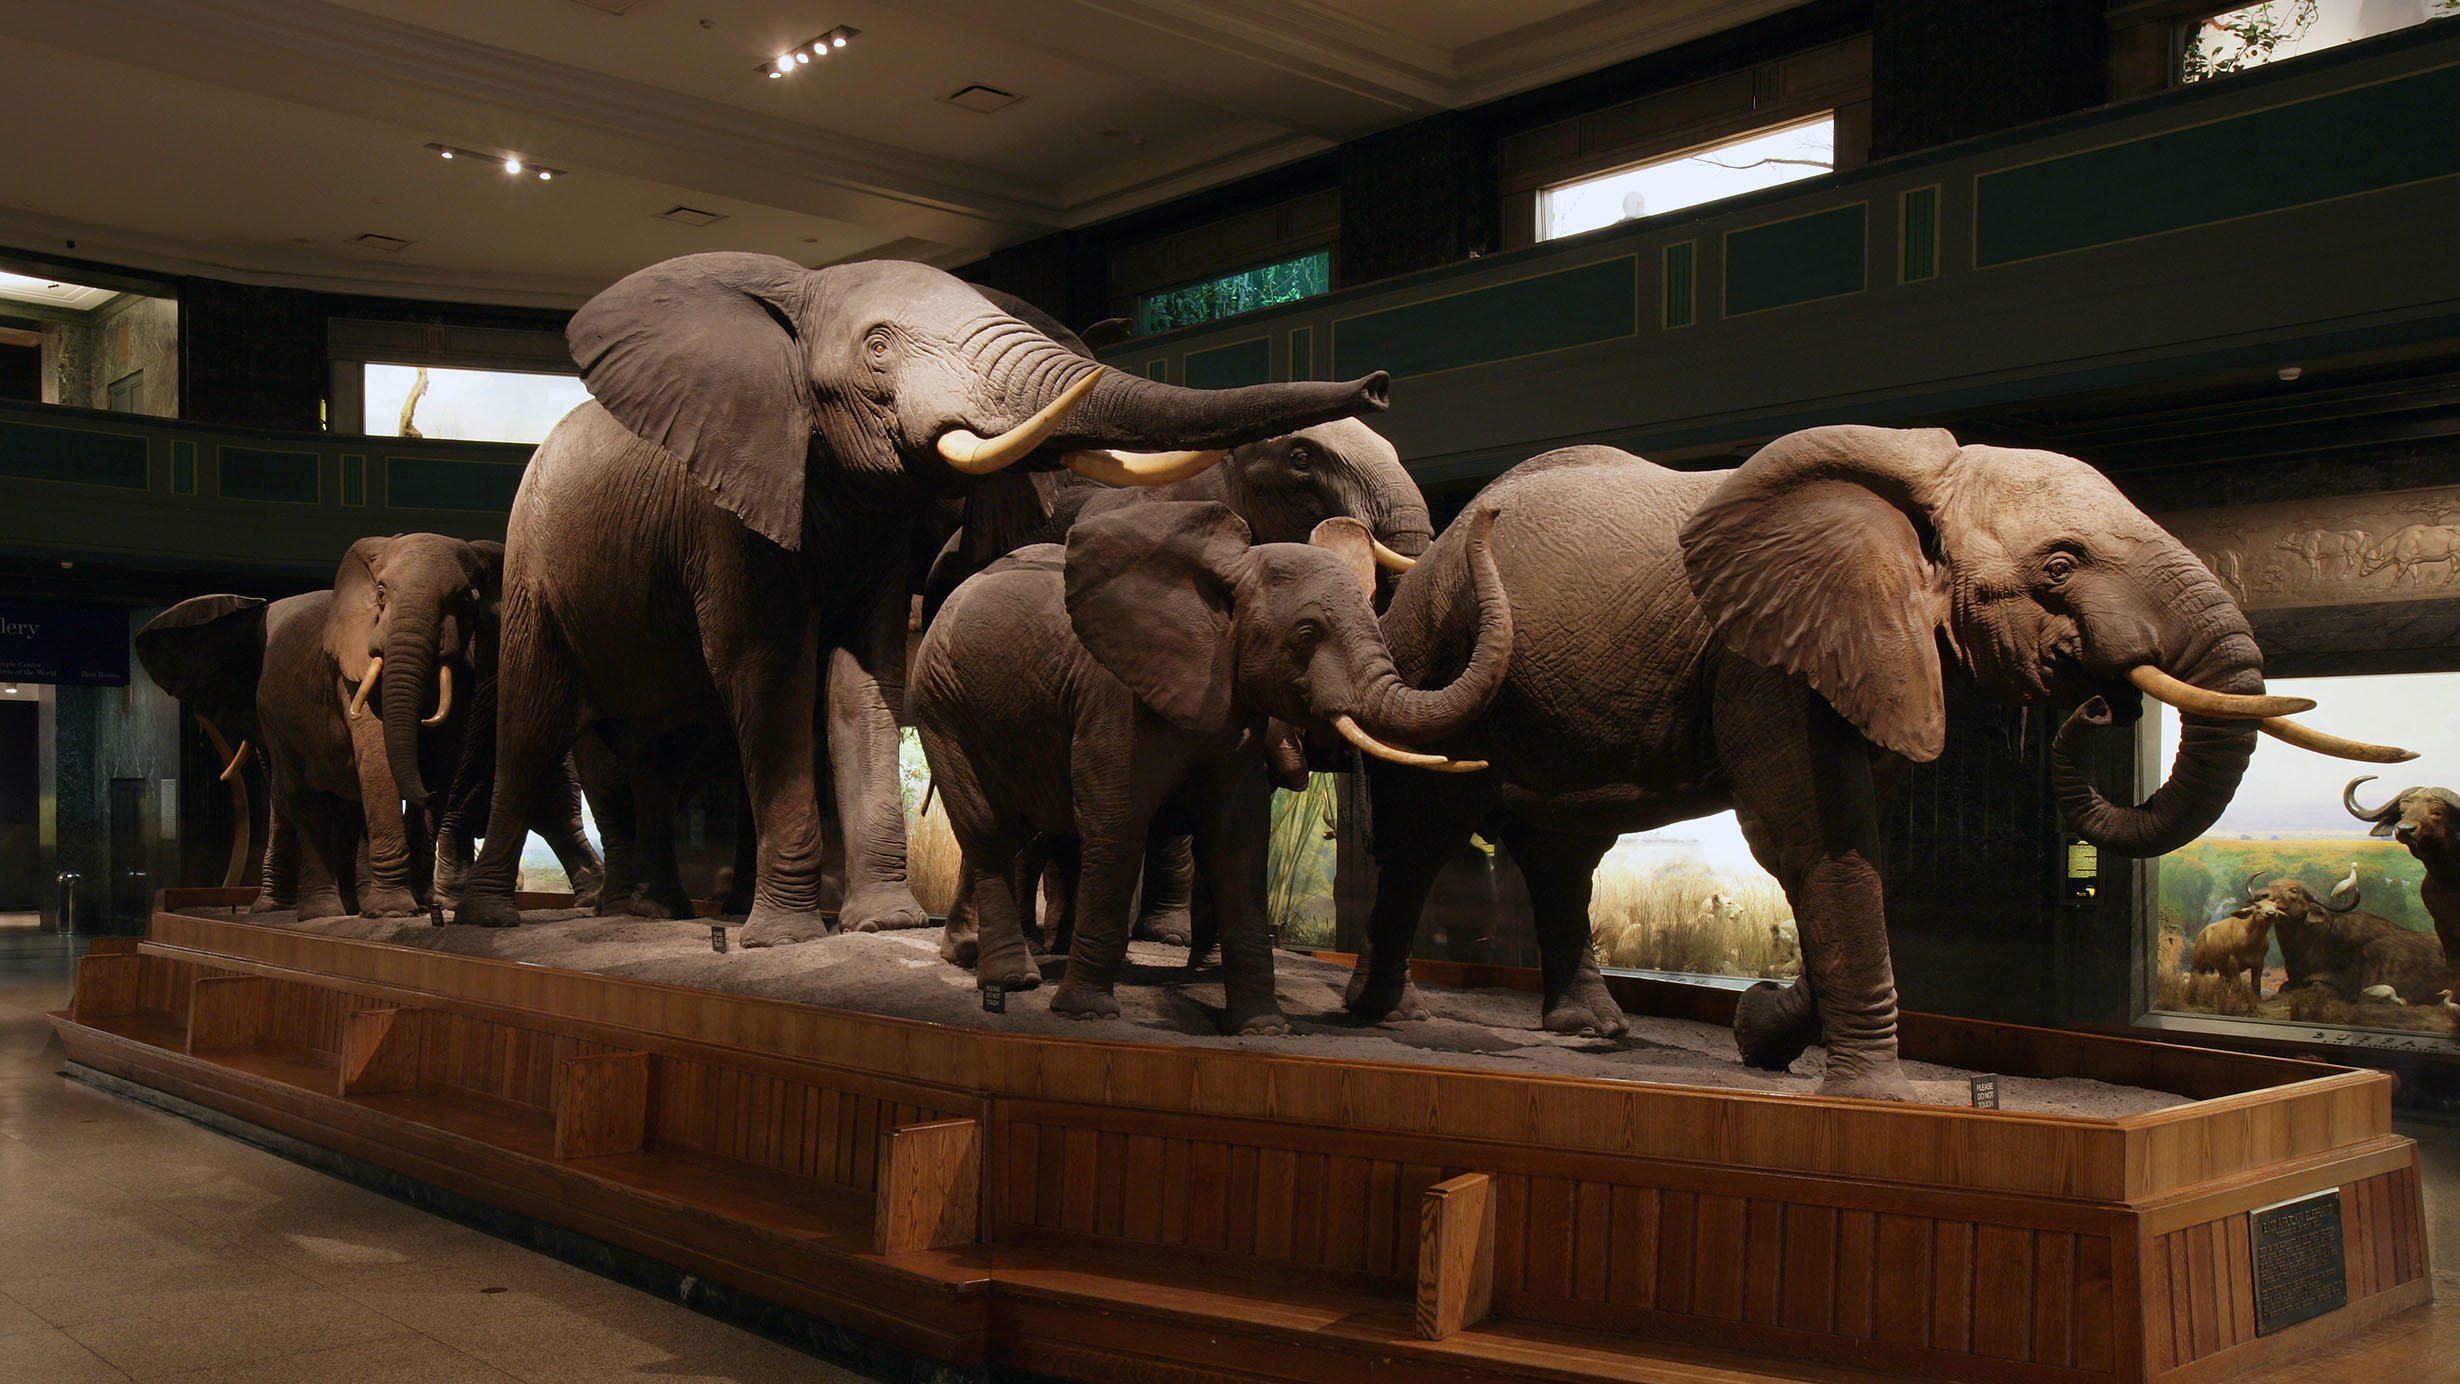 Elephant procession in the Akeley Hall